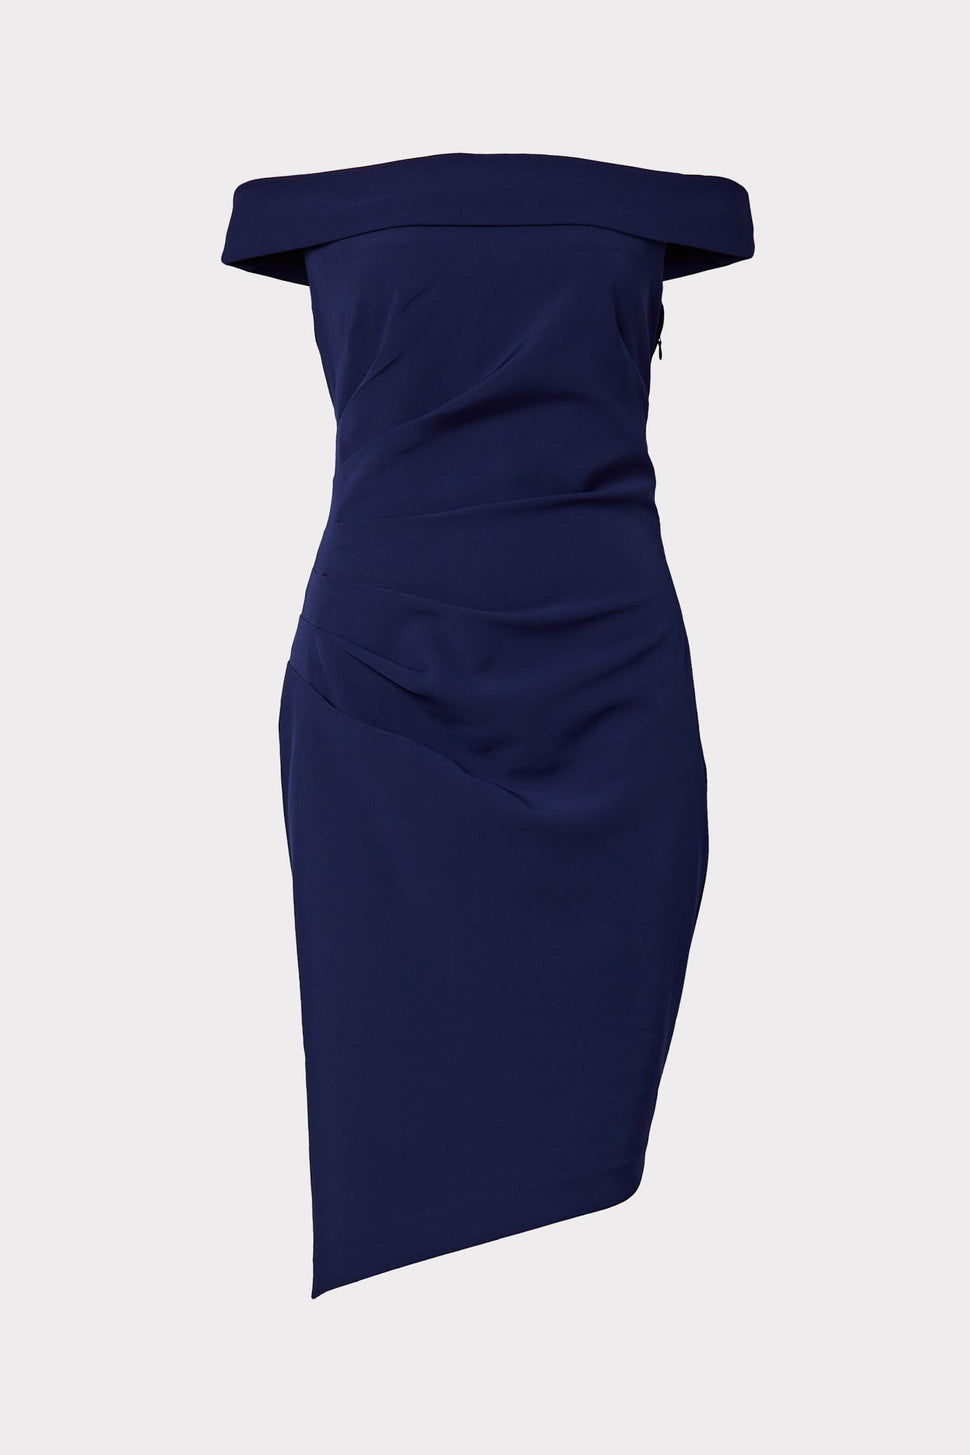 Buy GRACE KARIN Summer Formal Midi Dresses for Women Wrap V-Neck  Asymmetrical Sleeve Rouched Bodycon Cocktail Dress Tie Front, Peacock Blue,  L at Amazon.in